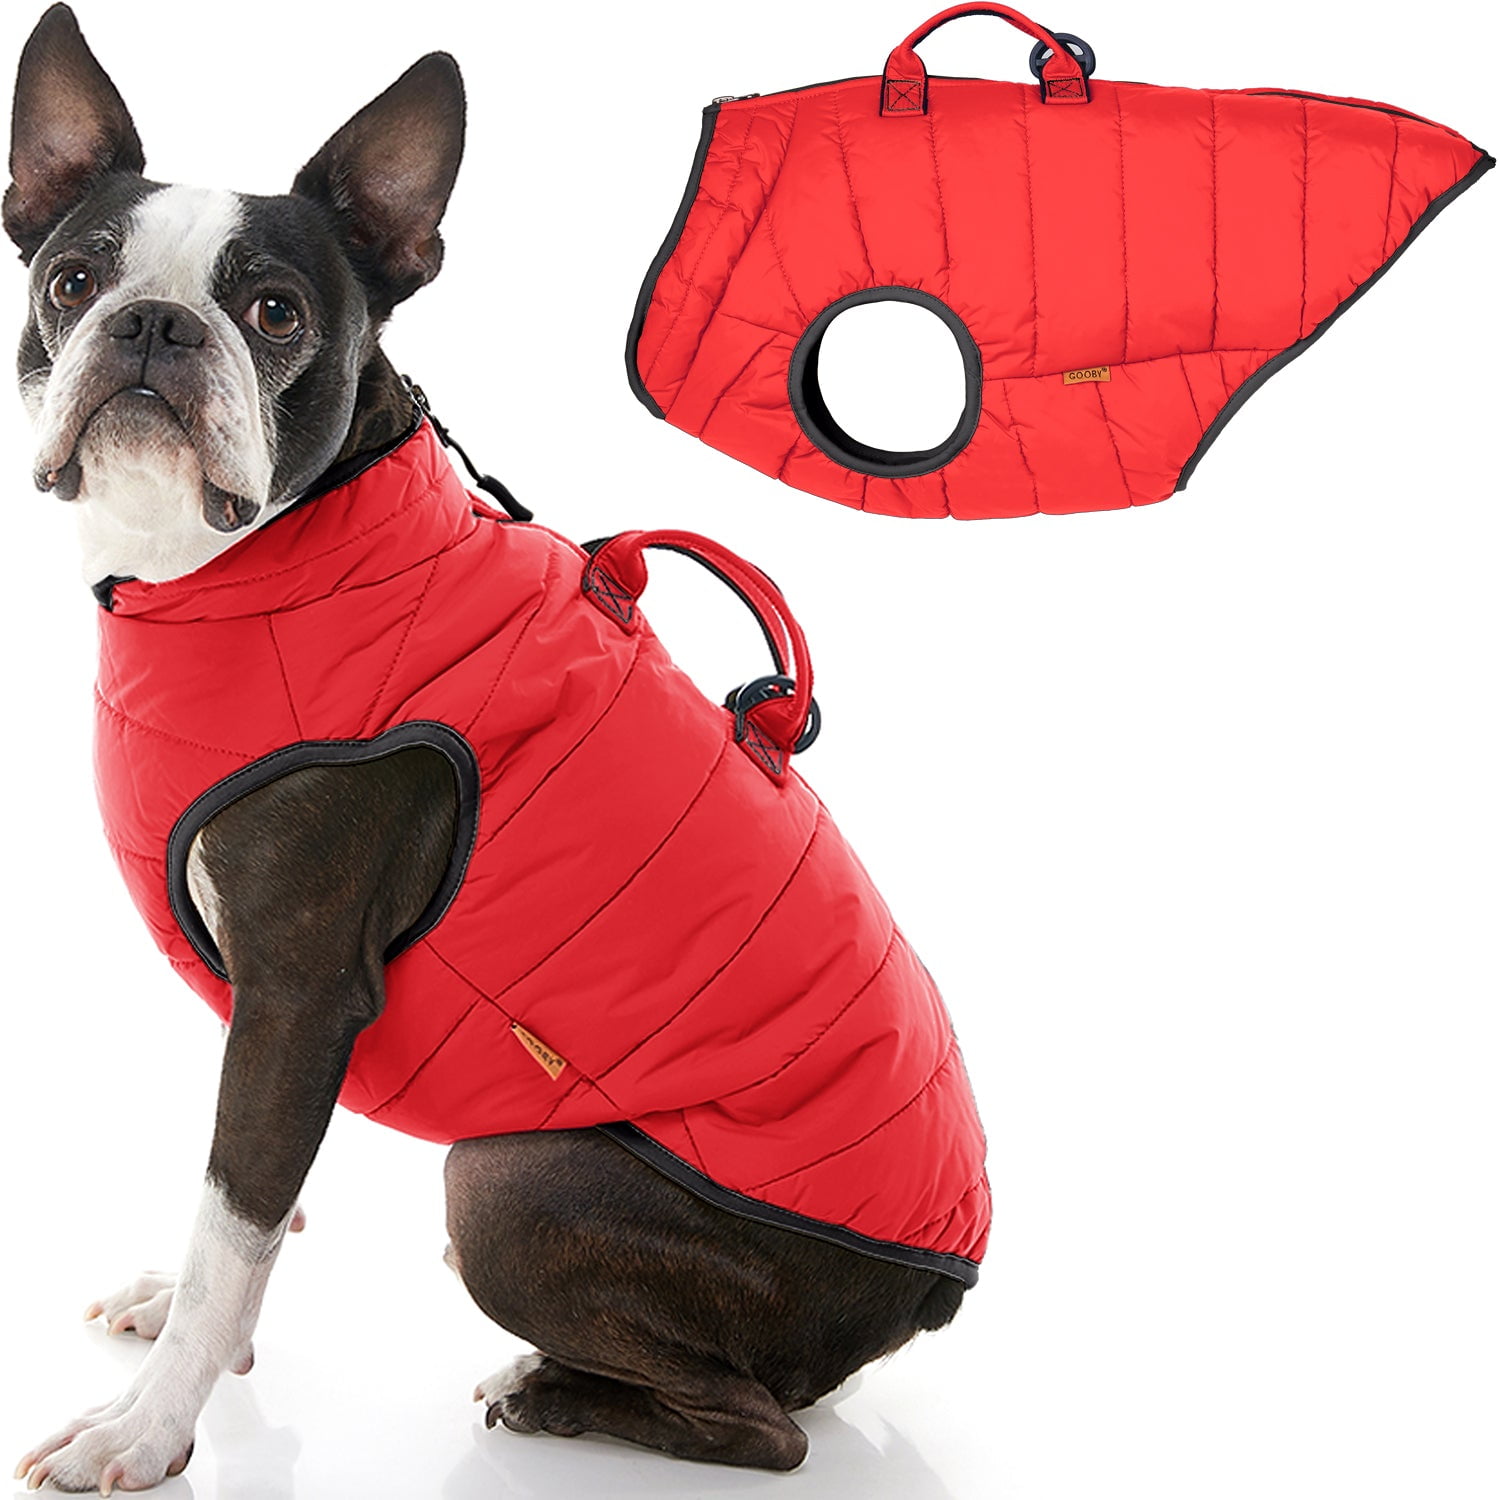 Padded Vest Gooby Dog Jacket Coat Sweater with Zipper Closure and Leash Ring 